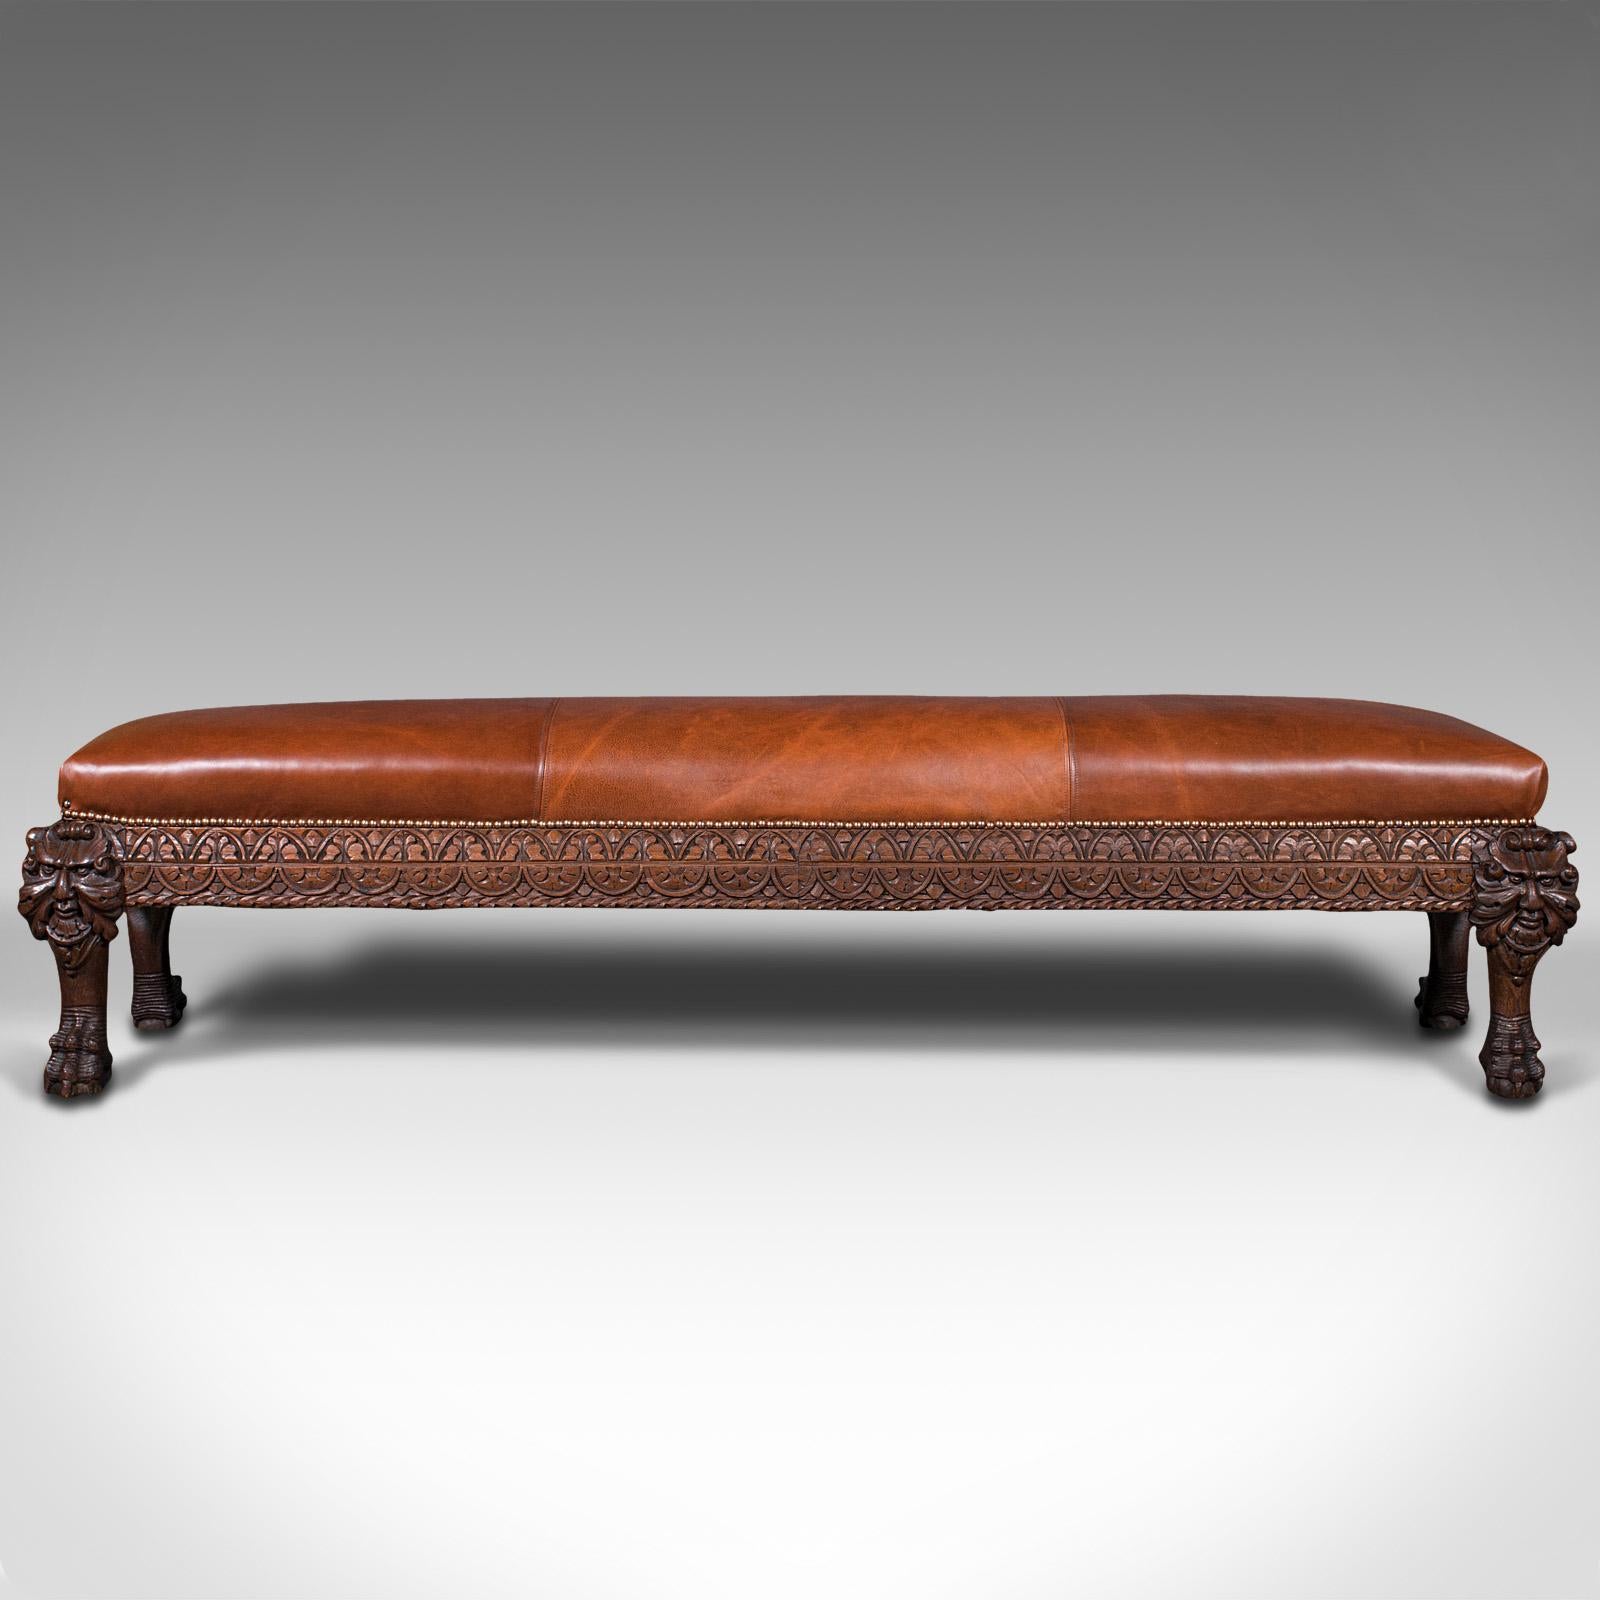 This is an antique carved window seat. An Italian, oak and leather bench or hallway pew, dating to the Victorian period, circa 1880.

Warm and inviting colour palate with a striking carved appearance
Displays a desirable aged patina